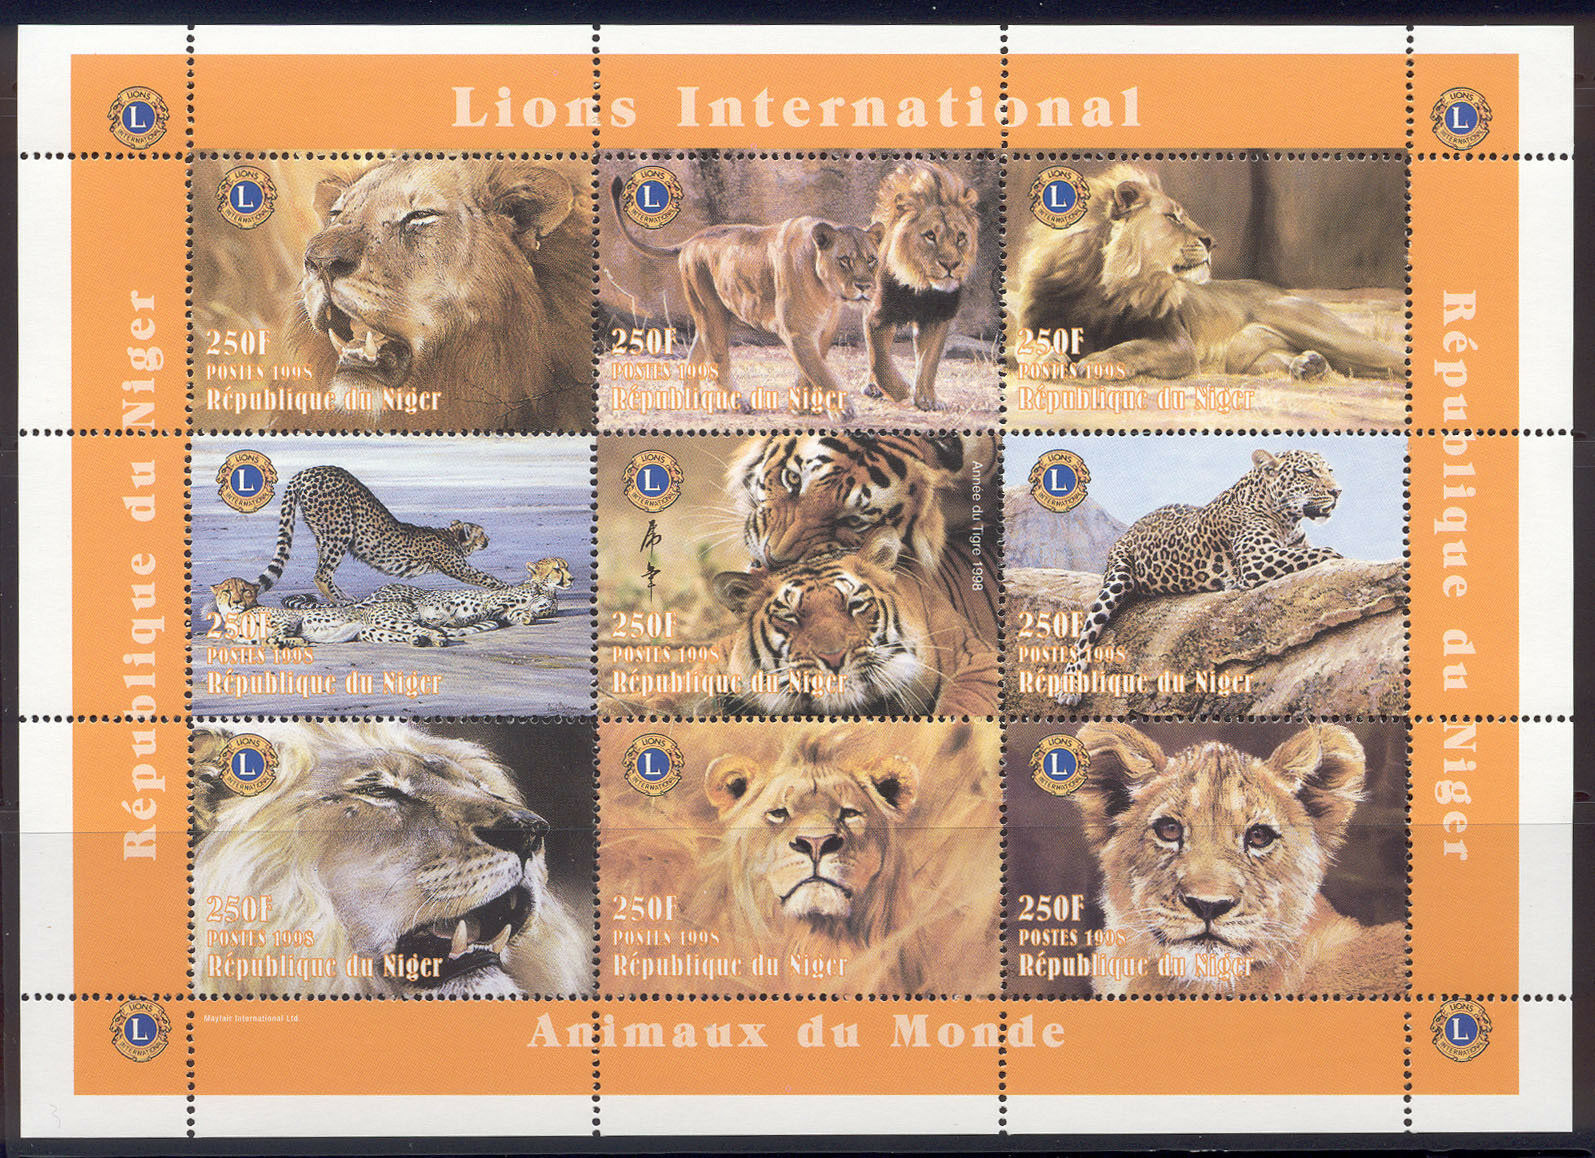 Niger - 1998 MNH mini-sheet of 9 Lions stamps #1004 Lot #1